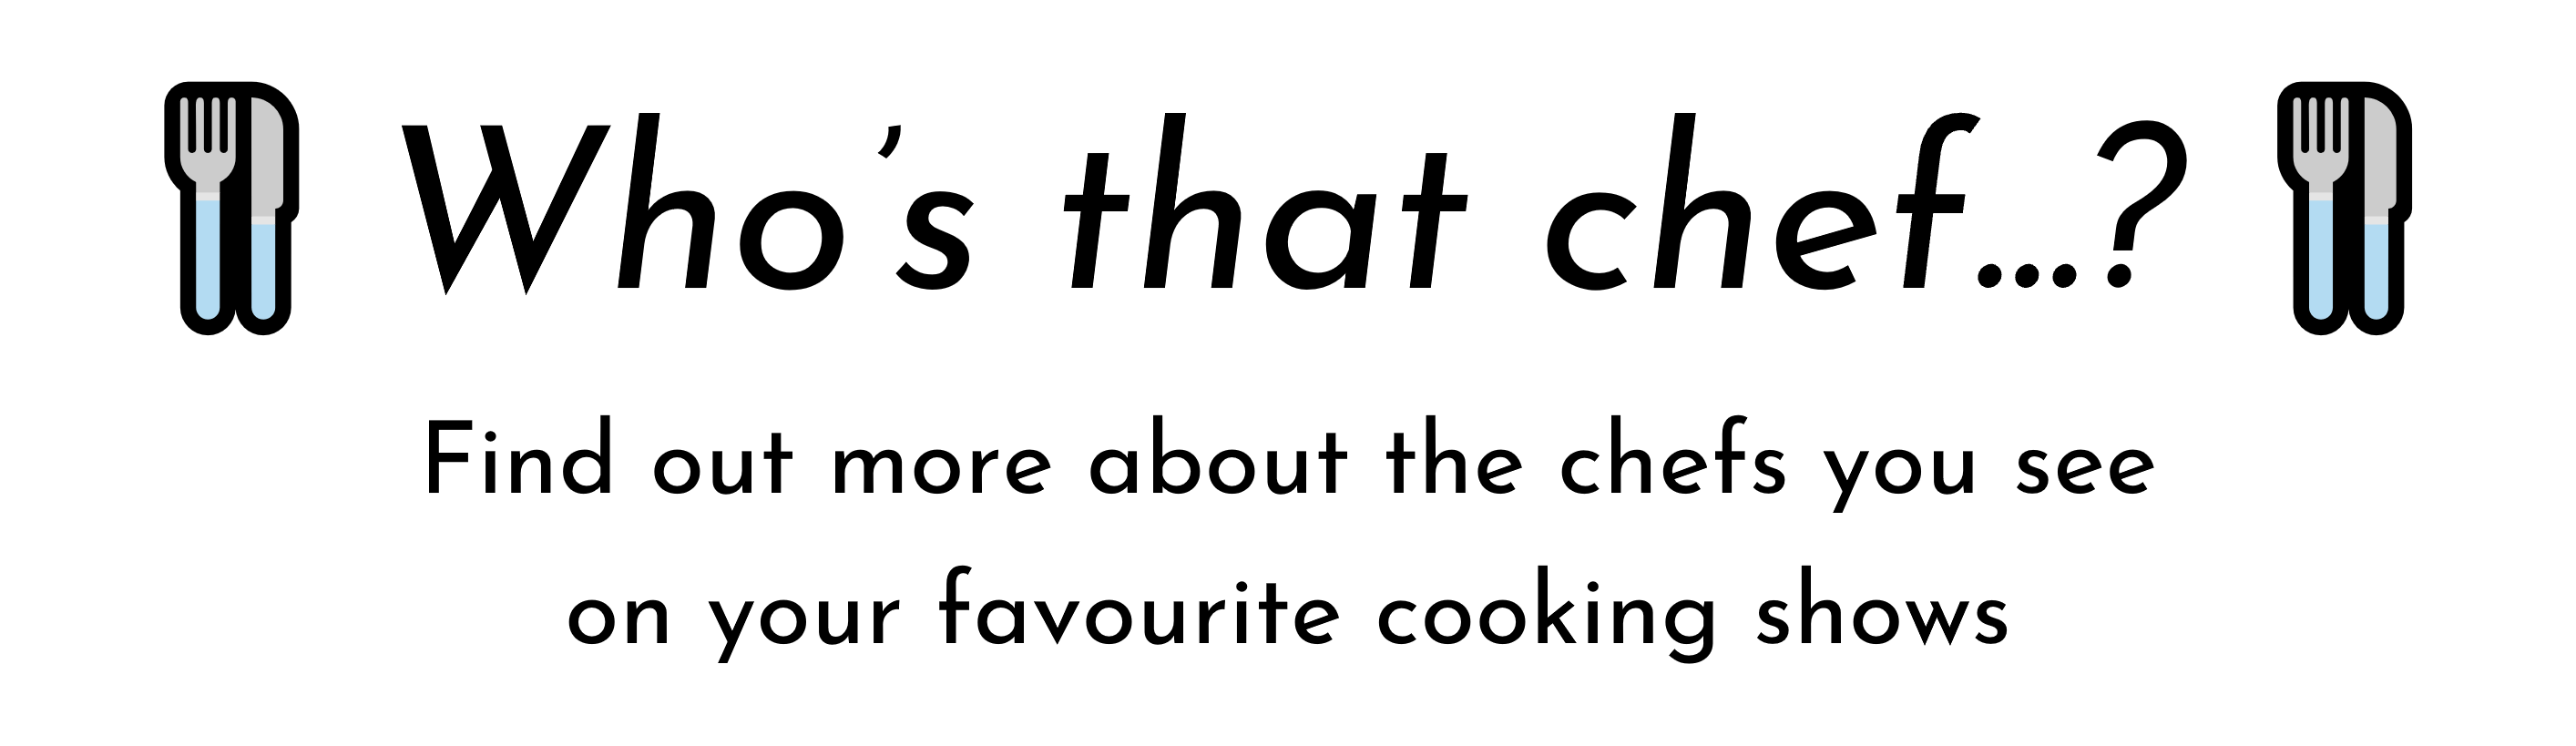 Header: Who's that chef? FInd out more about the chefs you see on your favourite cooking shows